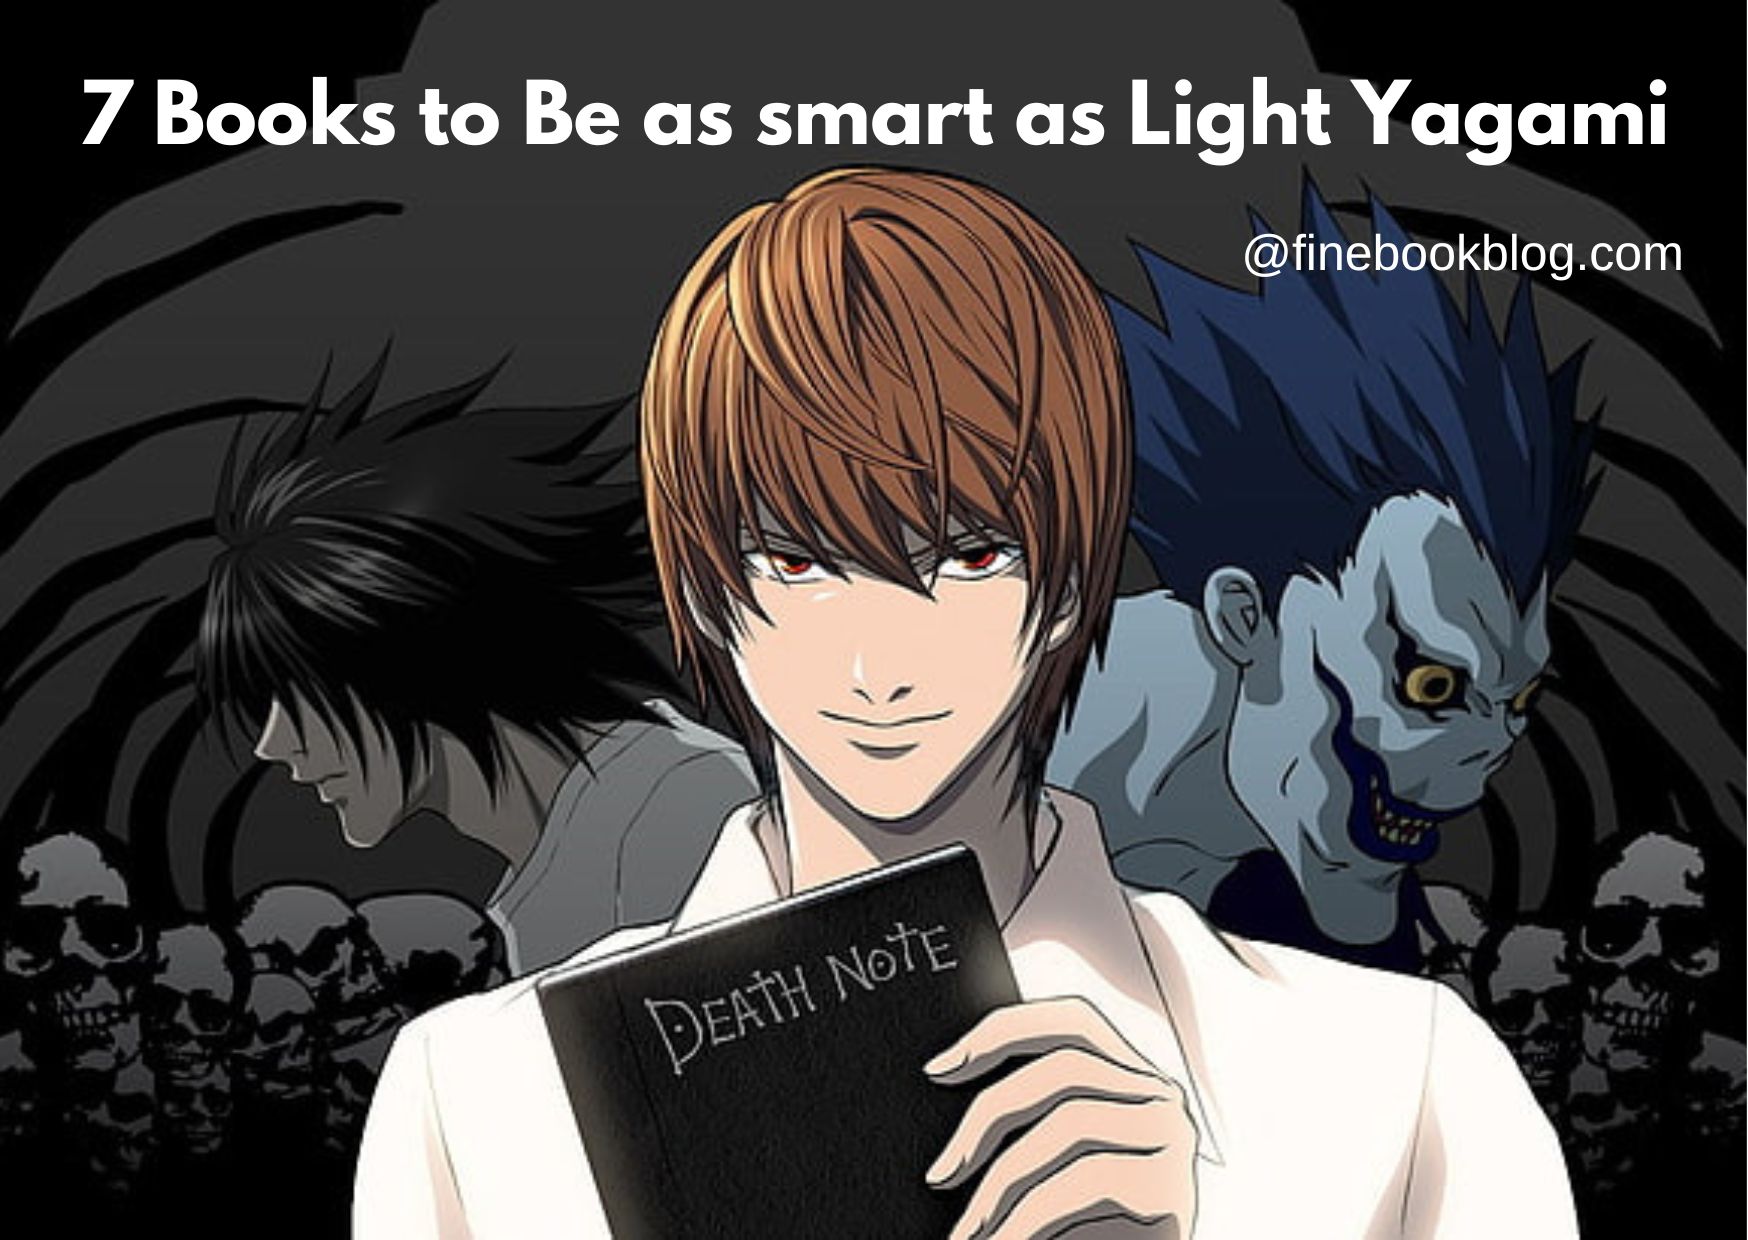 Books-to-be-as-smart-as-light-yagami-anime